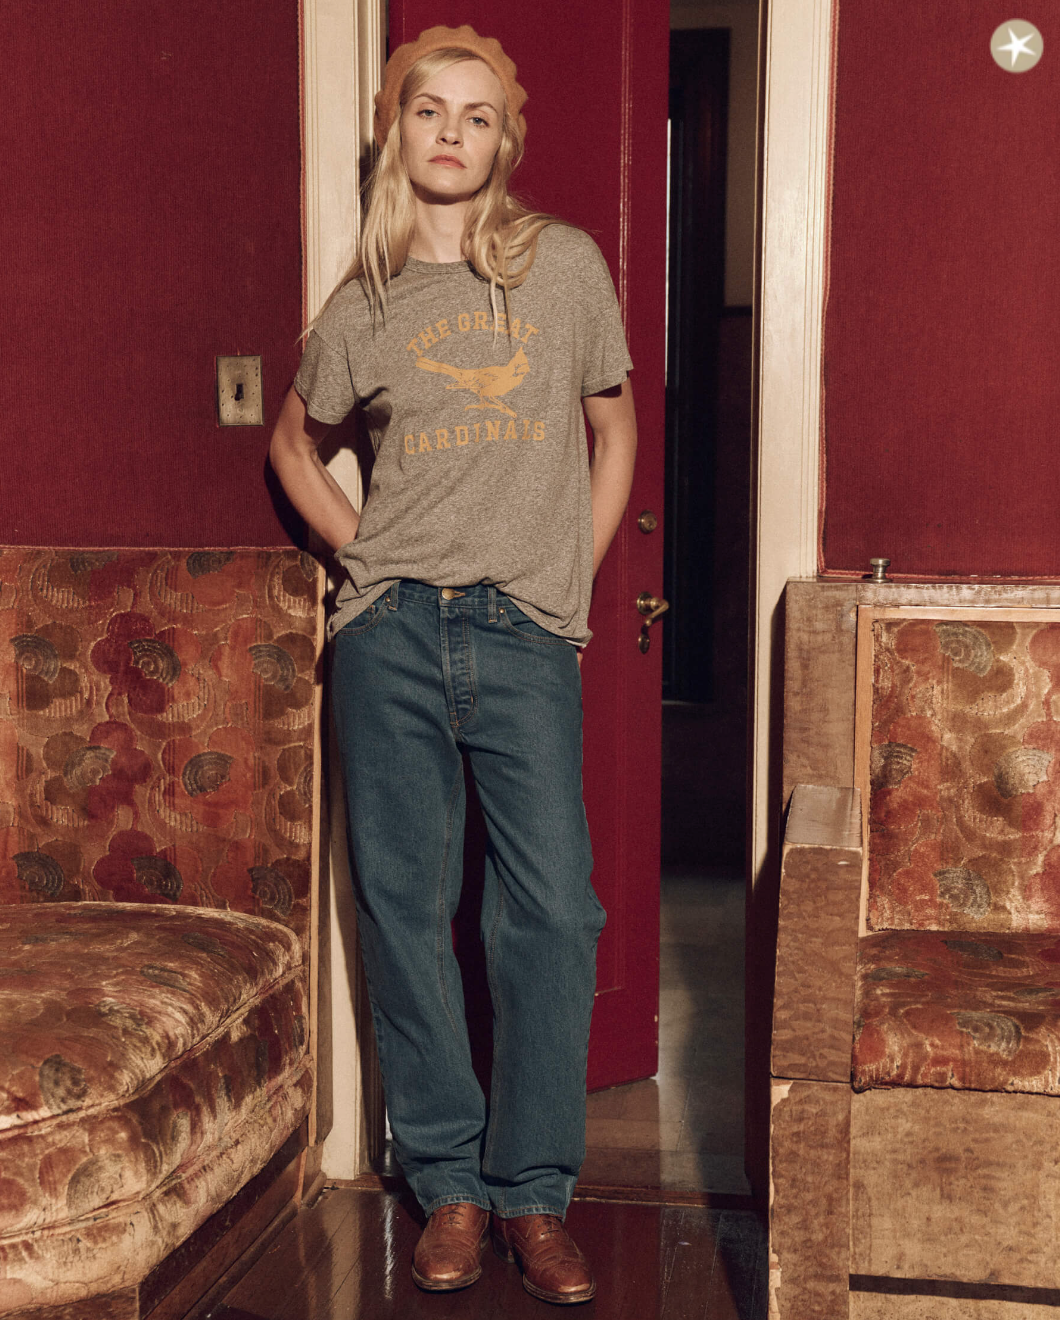 A woman with blonde hair stands confidently in a bungalow, wearing a gray vintage-style The Boxy Crew w/ Perched Cardinal T-shirt by The Great Inc., blue jeans, and brown leather shoes, with her hands in her pockets. She is surrounded by old-fashioned red upholstered chairs.